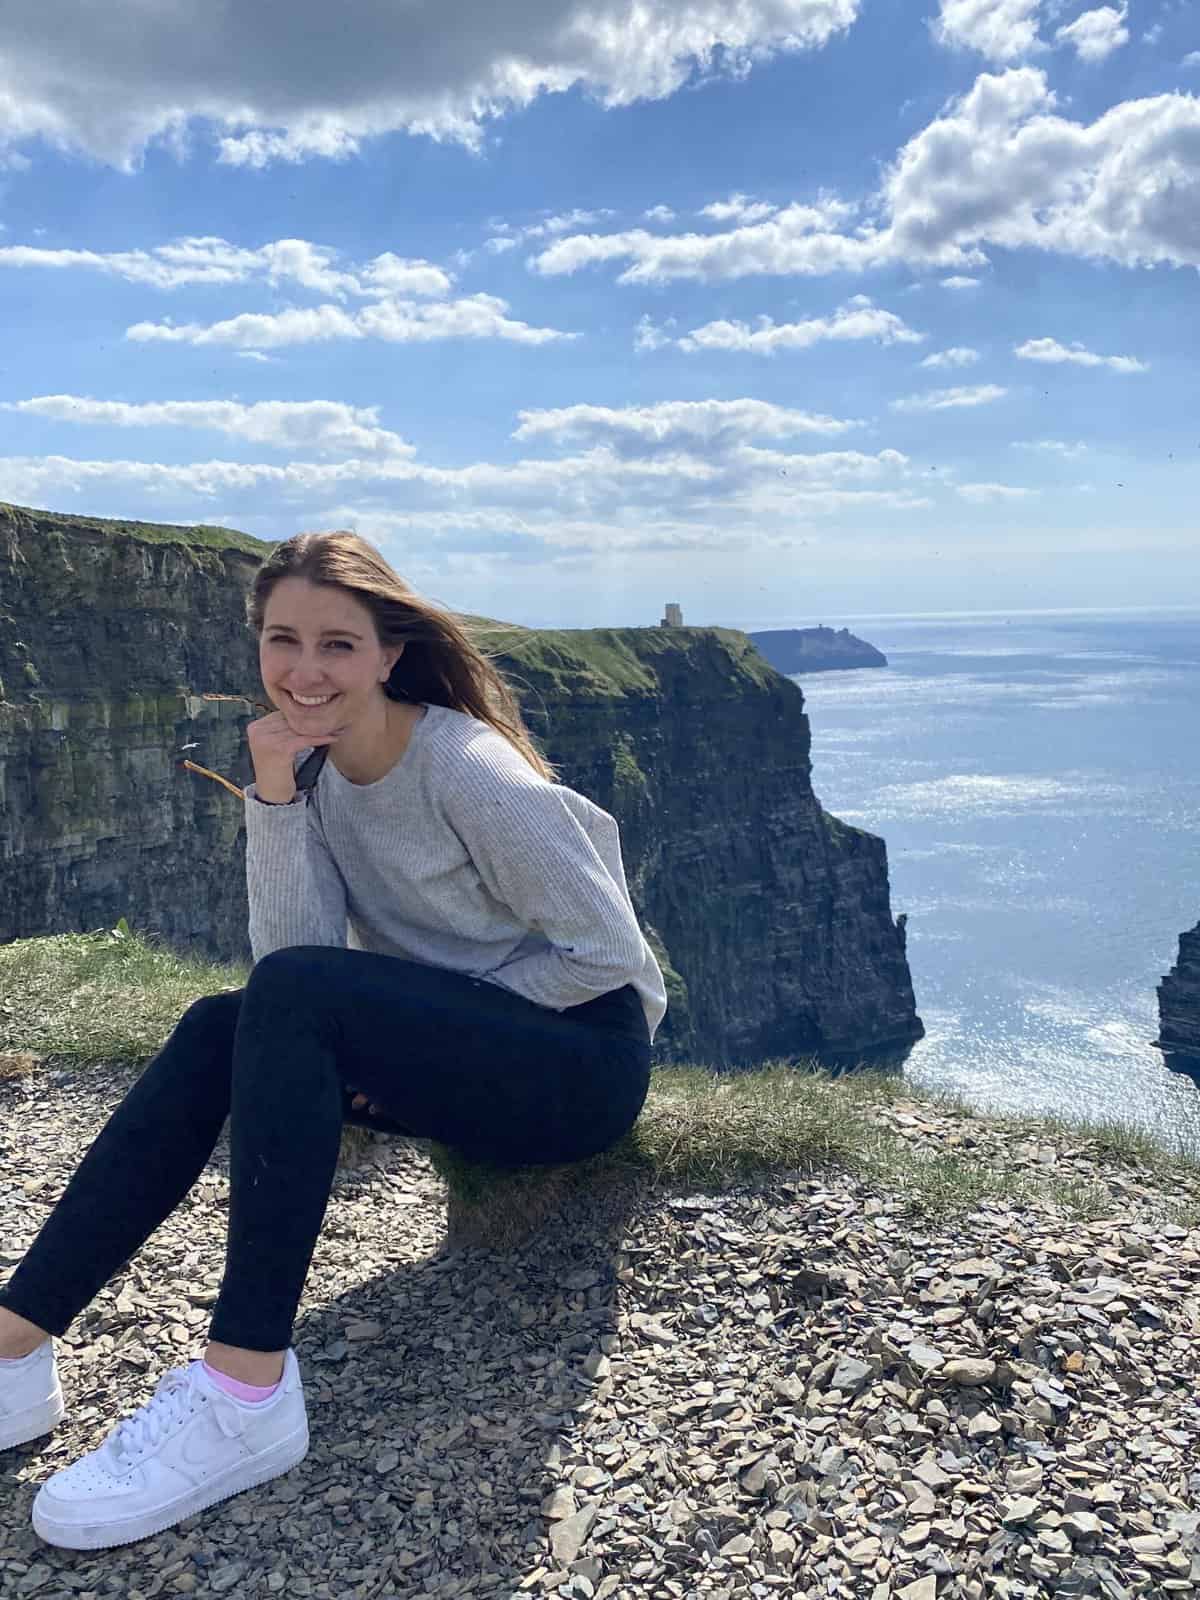 A girl posing in front of the Cliffs of Moher in Ireland.